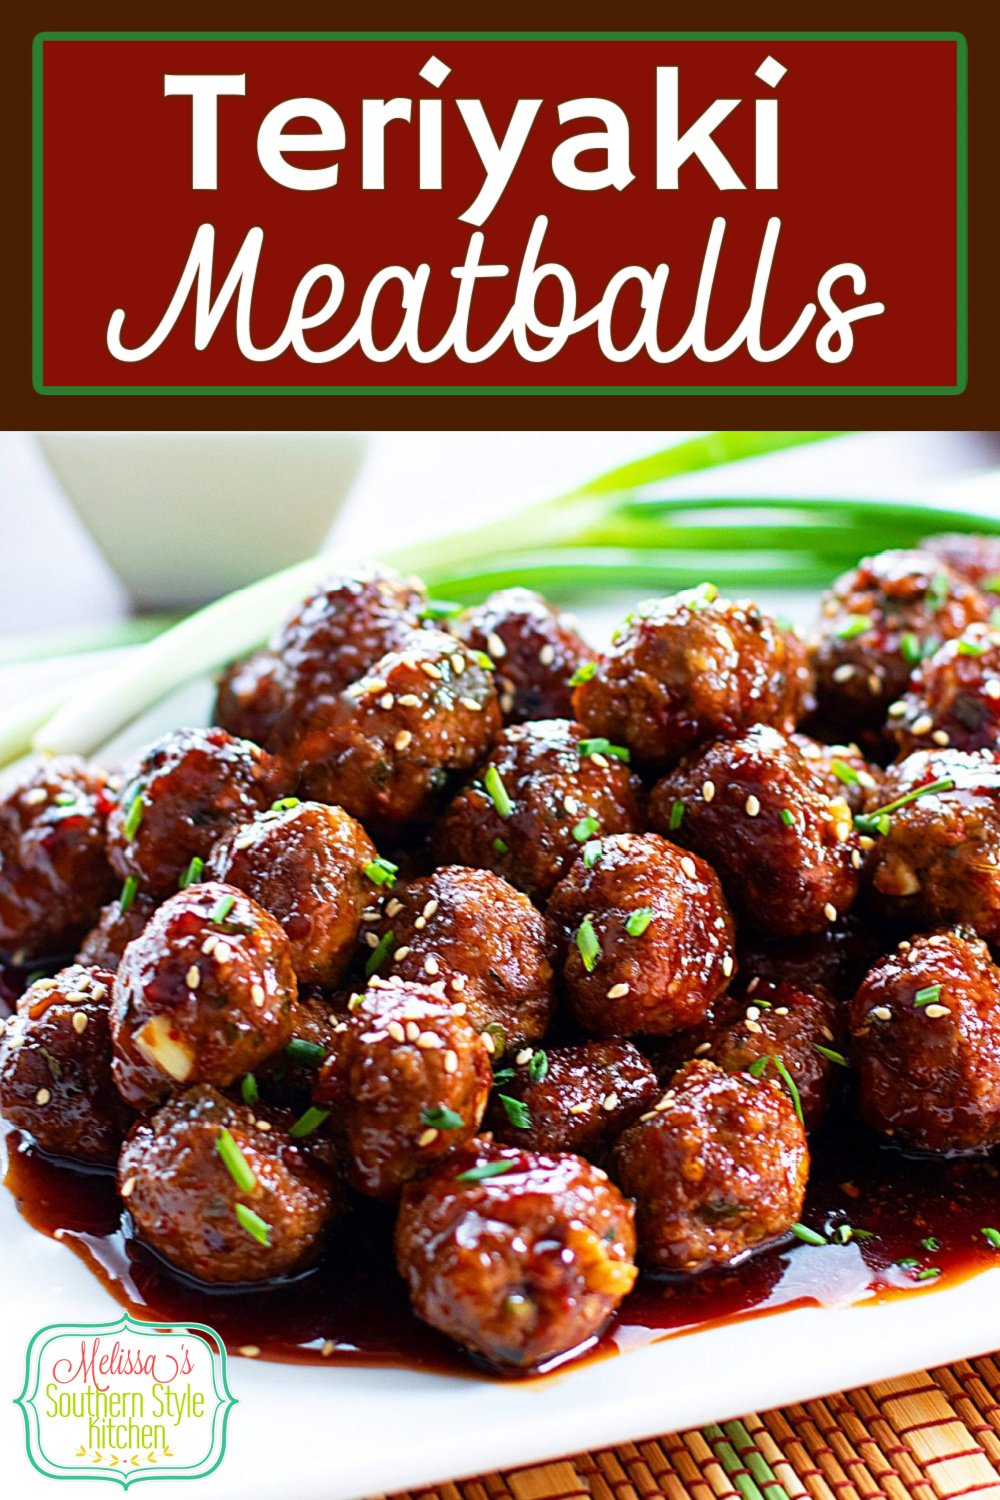 These sweet and spicy Teriyaki Meatballs can be served as a two-bite appetizer or over sticky rice as an entree. #teriyakimeatballs #meatballrecipes #bestmeatballsrecipes #Asianfood #Asianmeatballs #teriyakisauce #appetizers #dinnerideas #dinner #tailgating #partyfood #southernrecipes #southernfood via @melissasssk